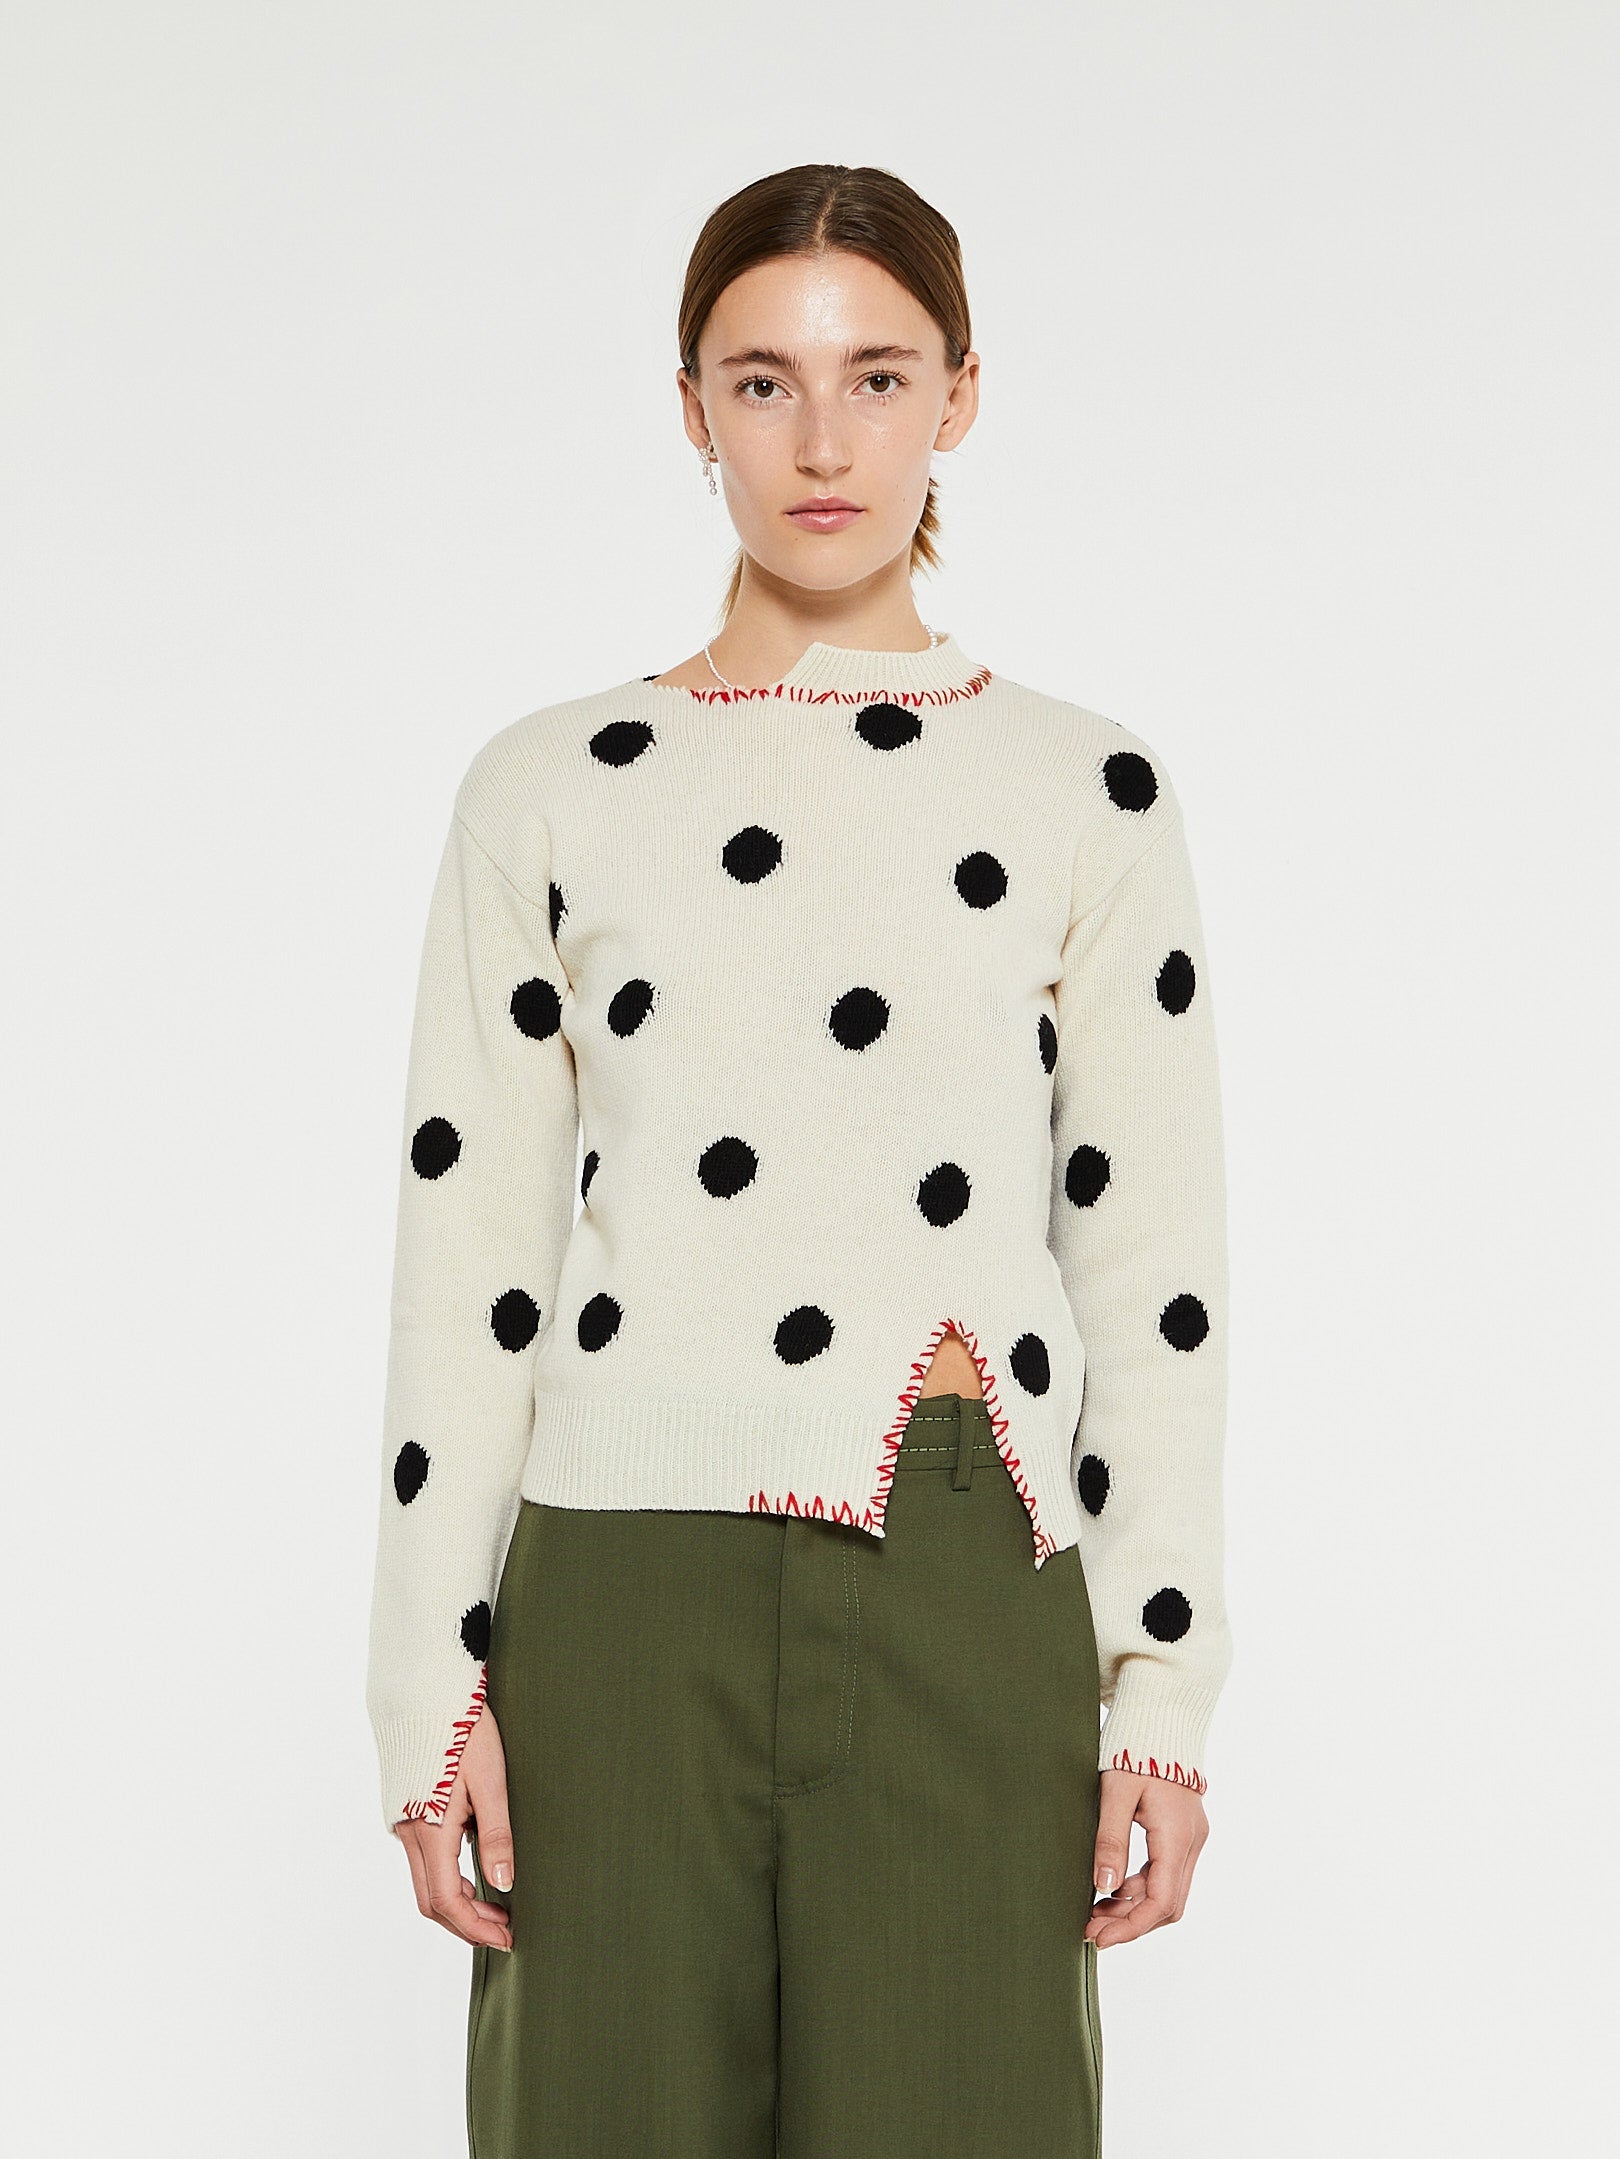 Marni - Roundneck Sweater in White and Black